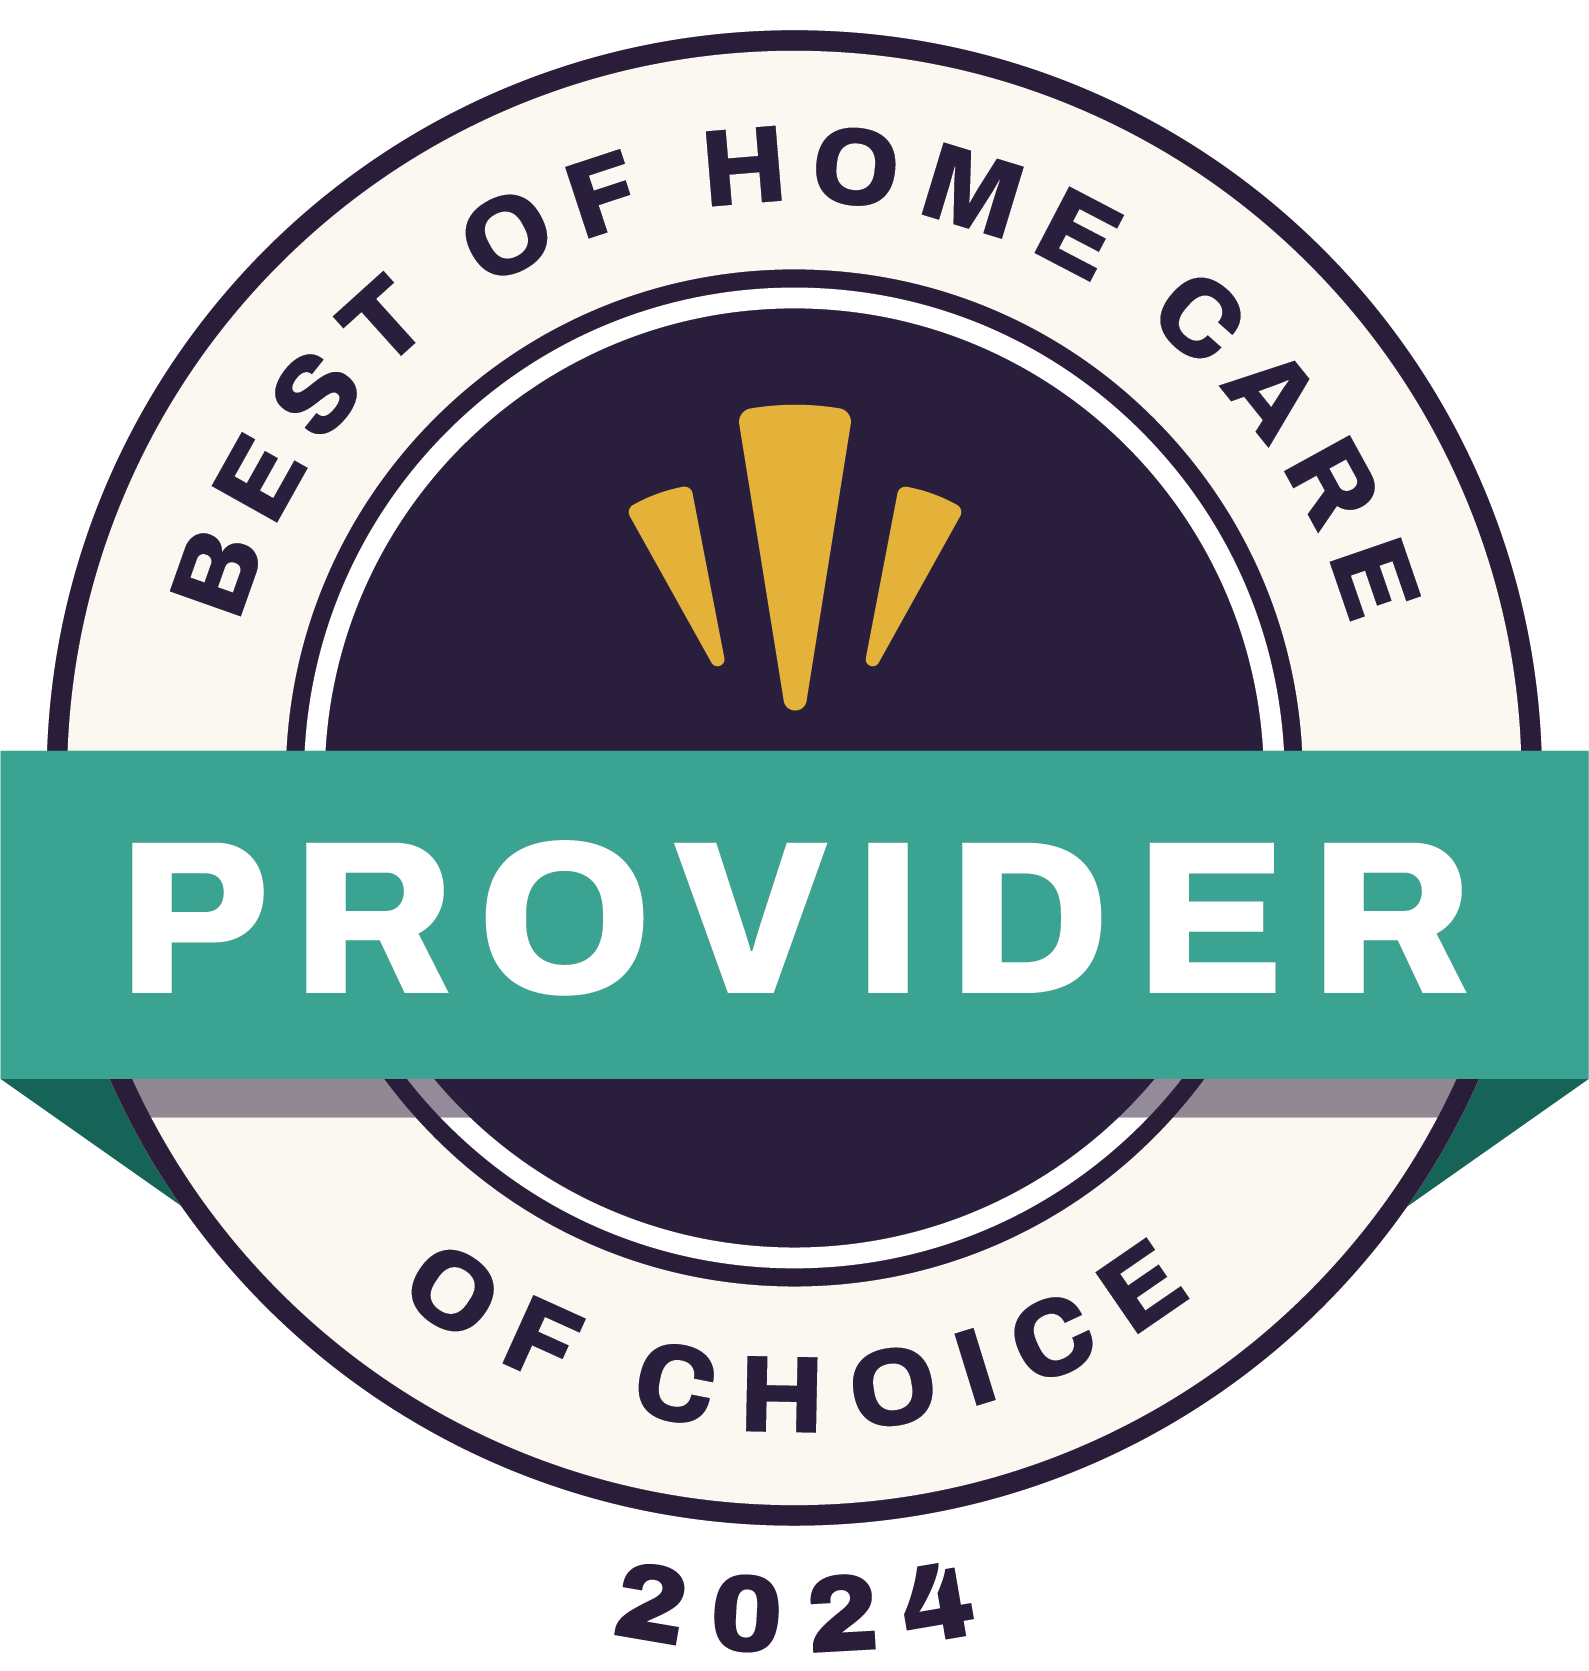 Best of home care provider of choice 2024